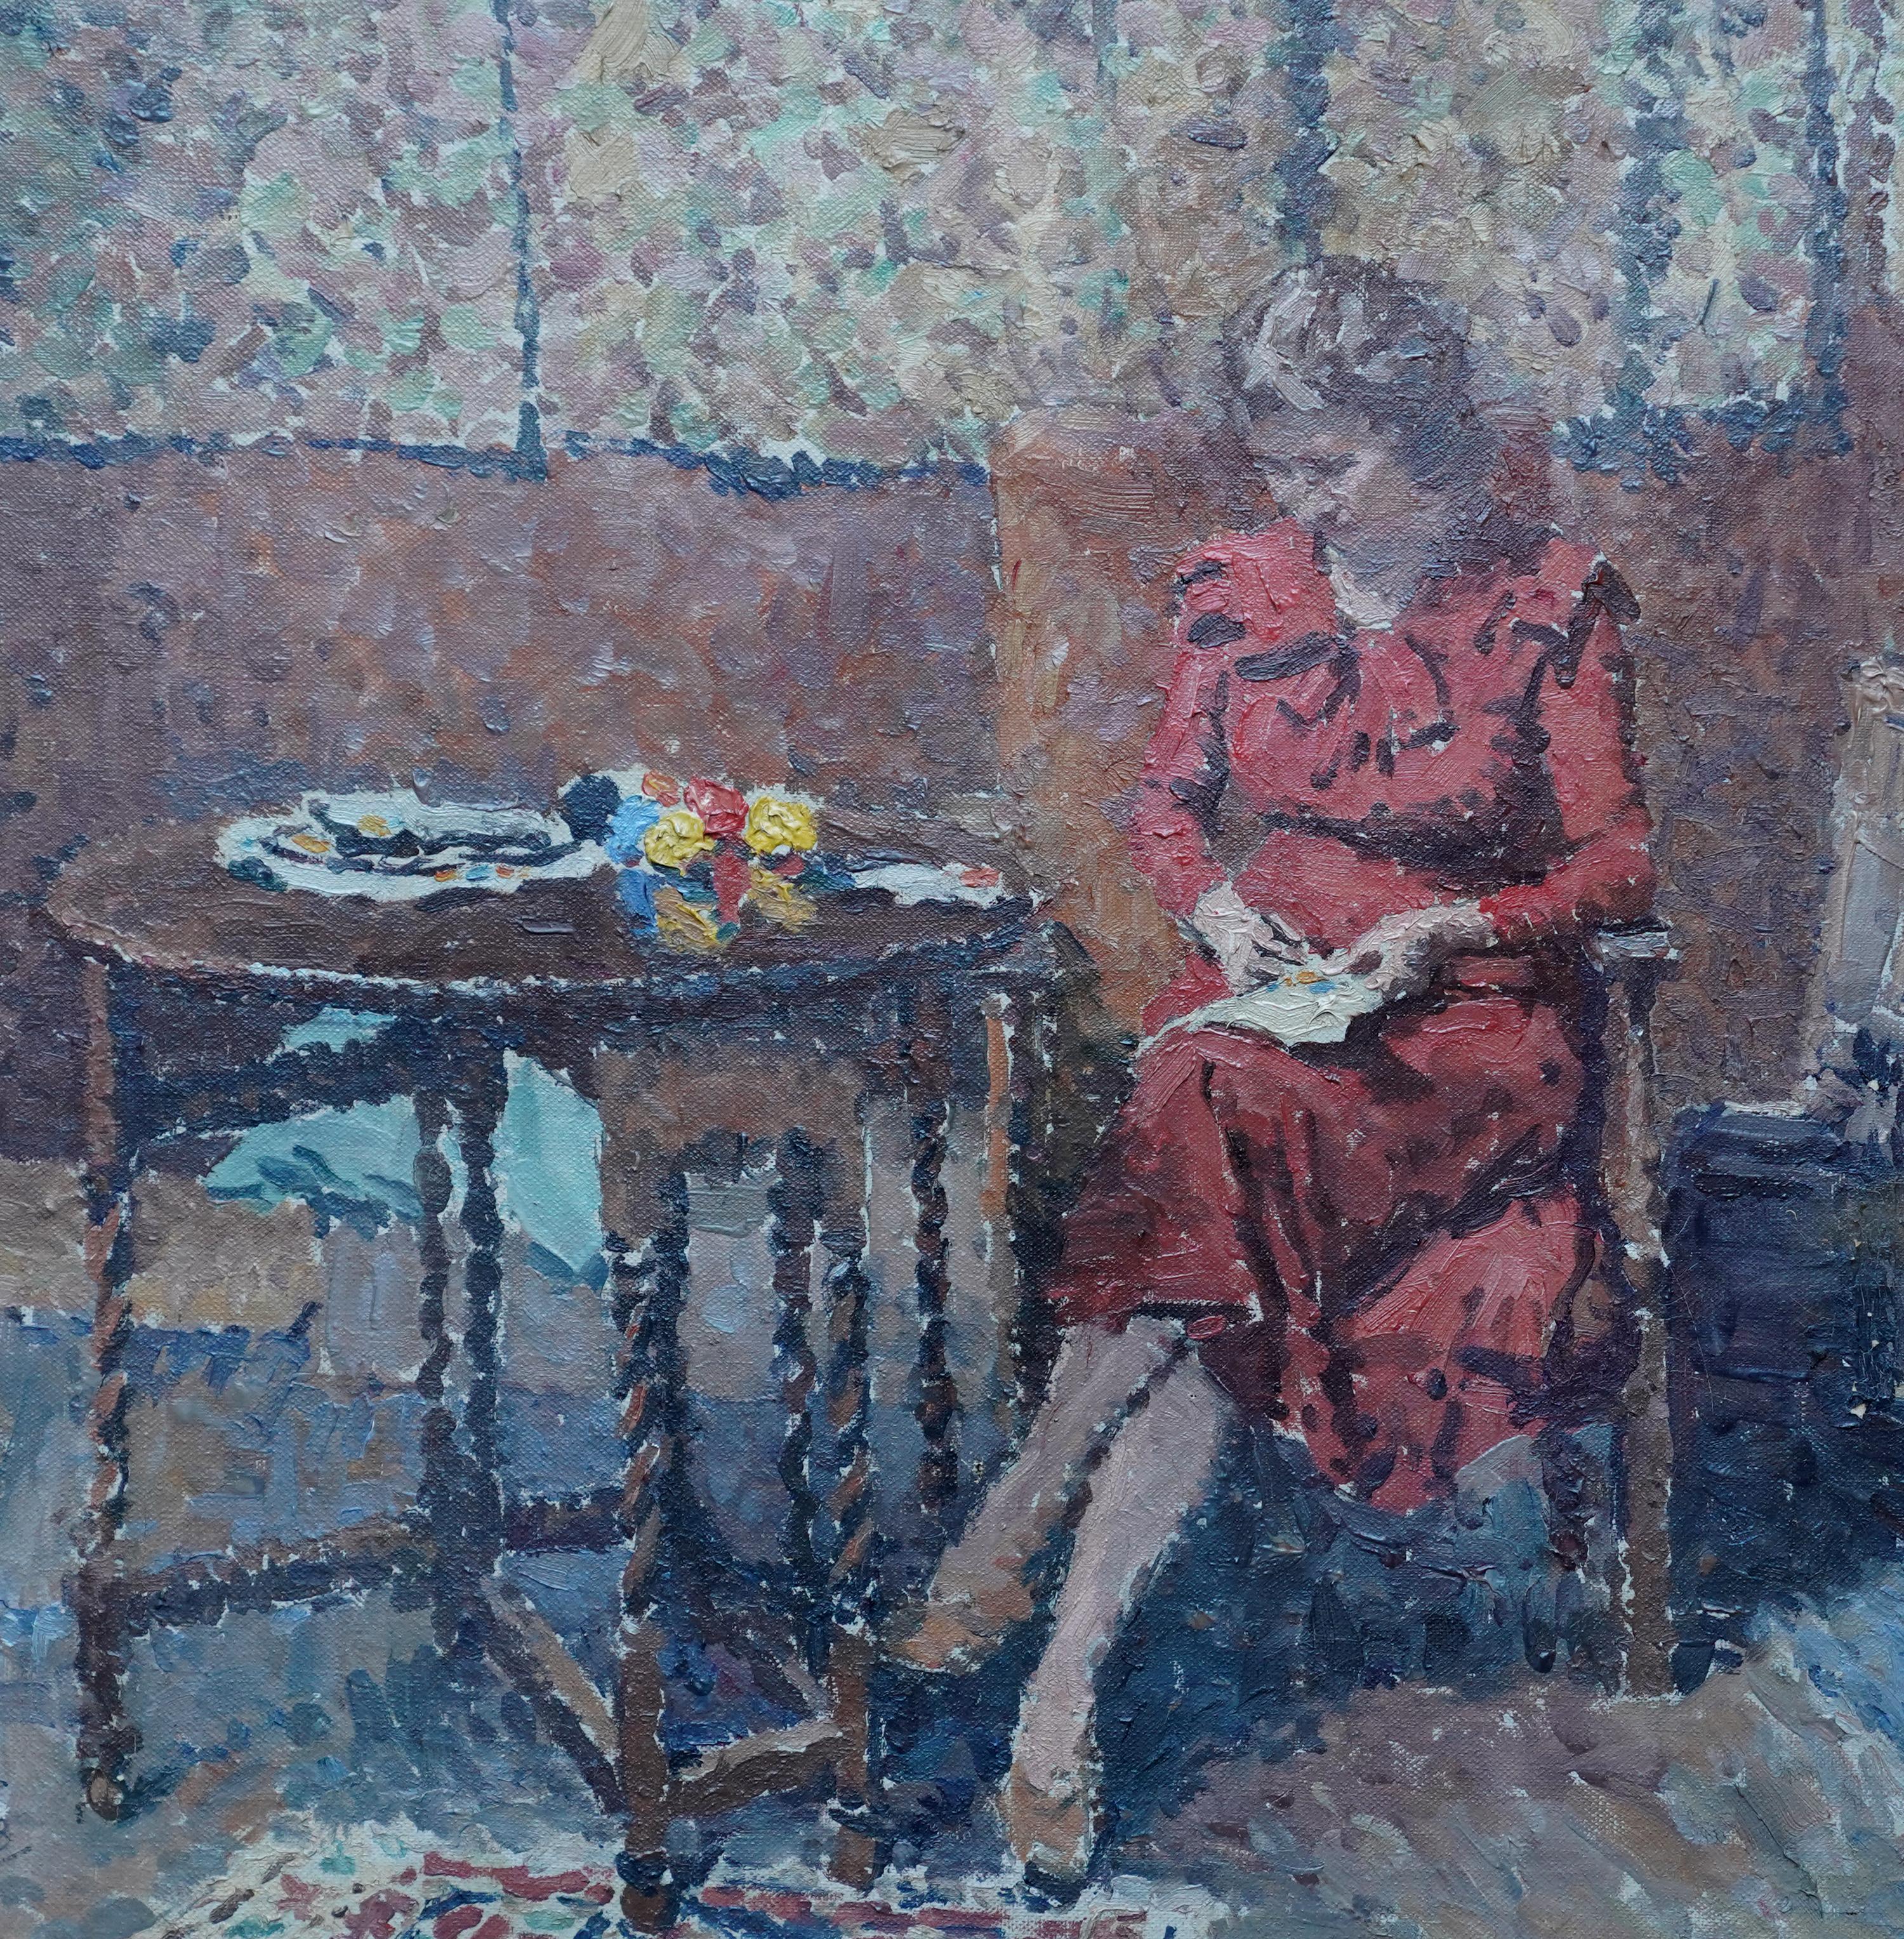 Portrait of Lady Sewing in an Interior - Scottish 40s Pointilliste oil painting - Post-Impressionist Painting by Murray McNeel Caird Urquhart